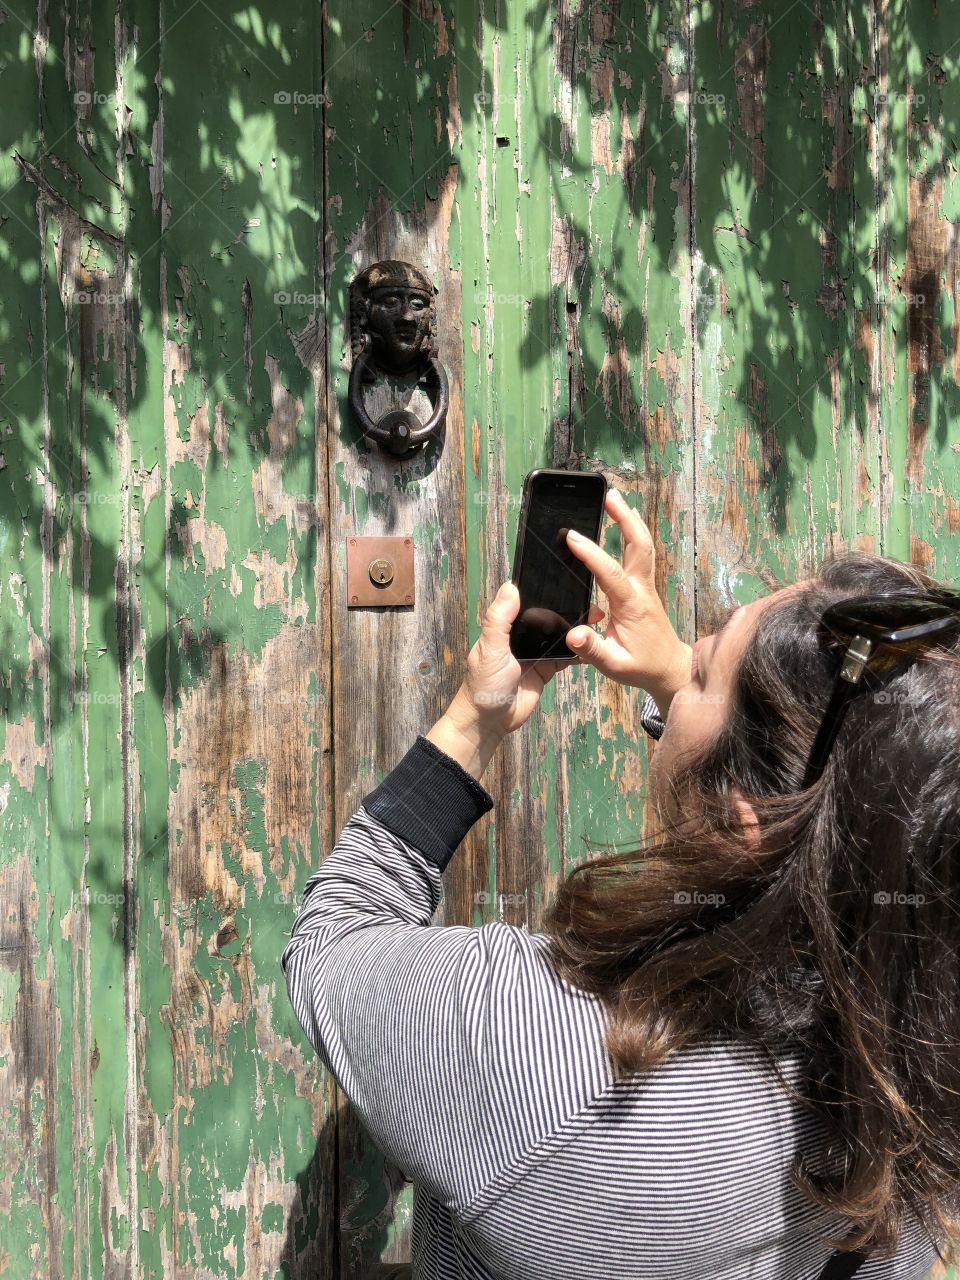 a green door and someone taking pictures on an iron fence